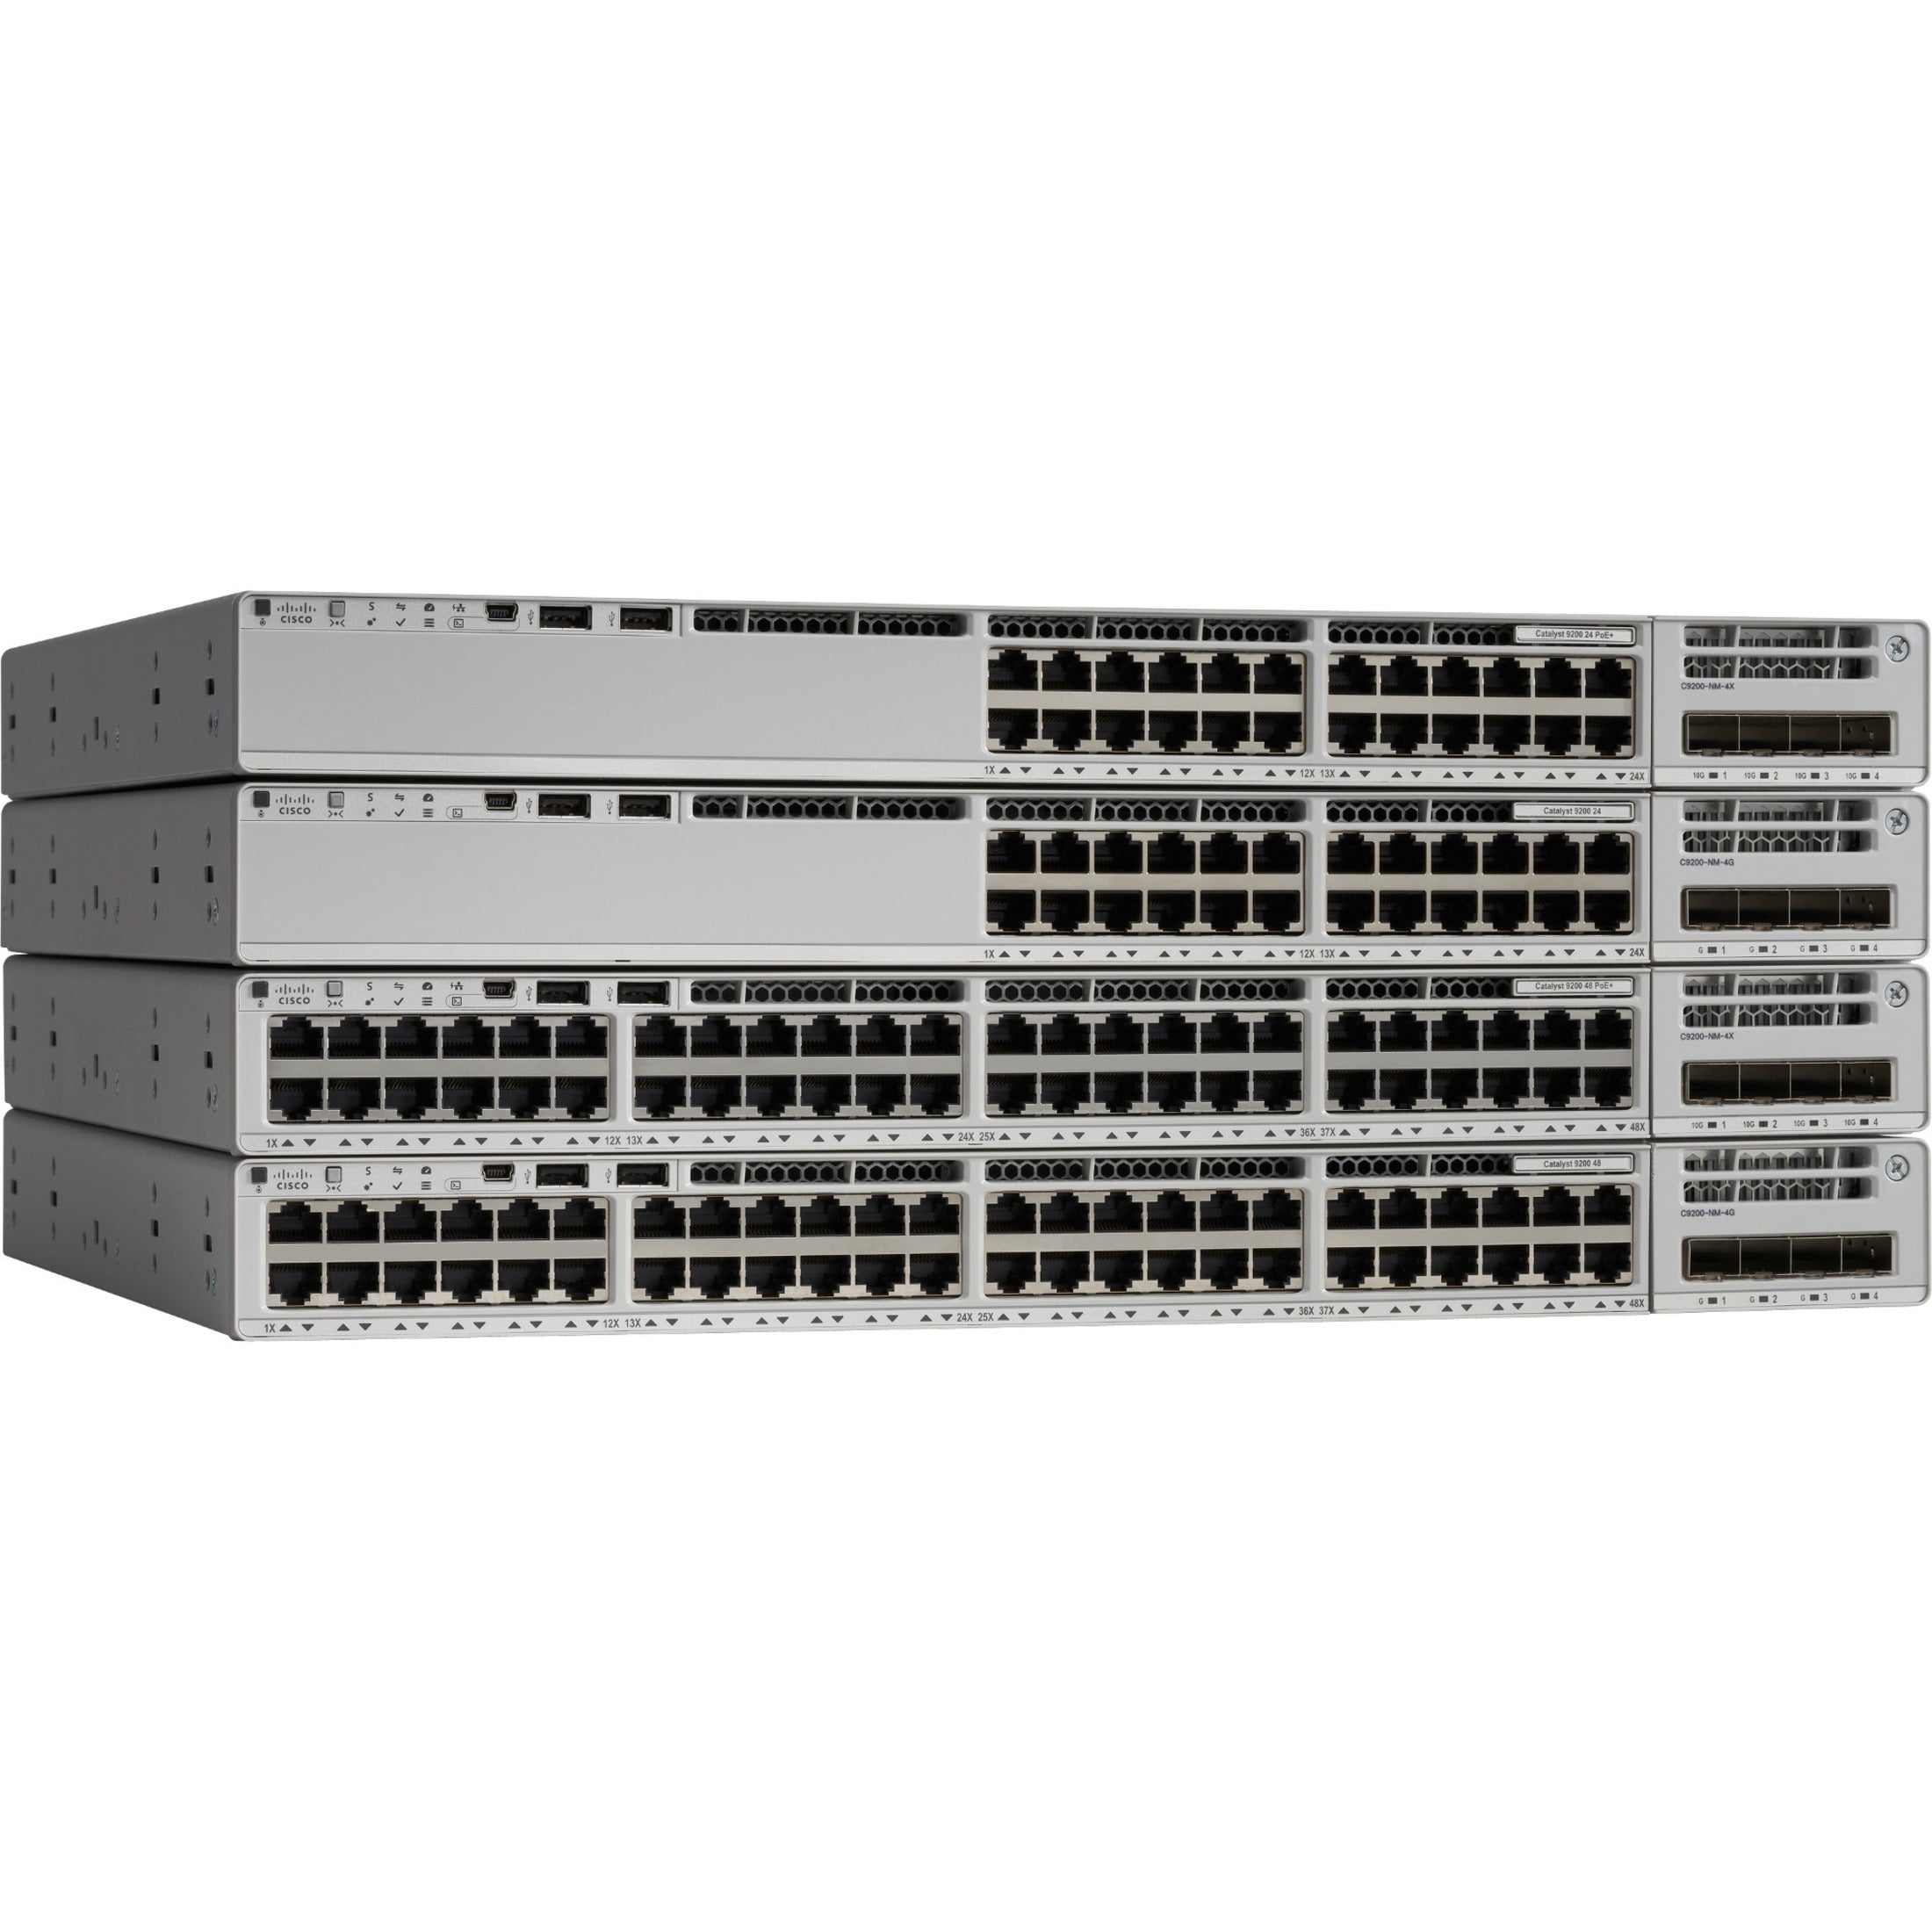 Cisco C9200-48T-A Catalyst C9200-48T Layer 3 Switch, 48 x Gigabit Ethernet Network, Power Supply, Manageable